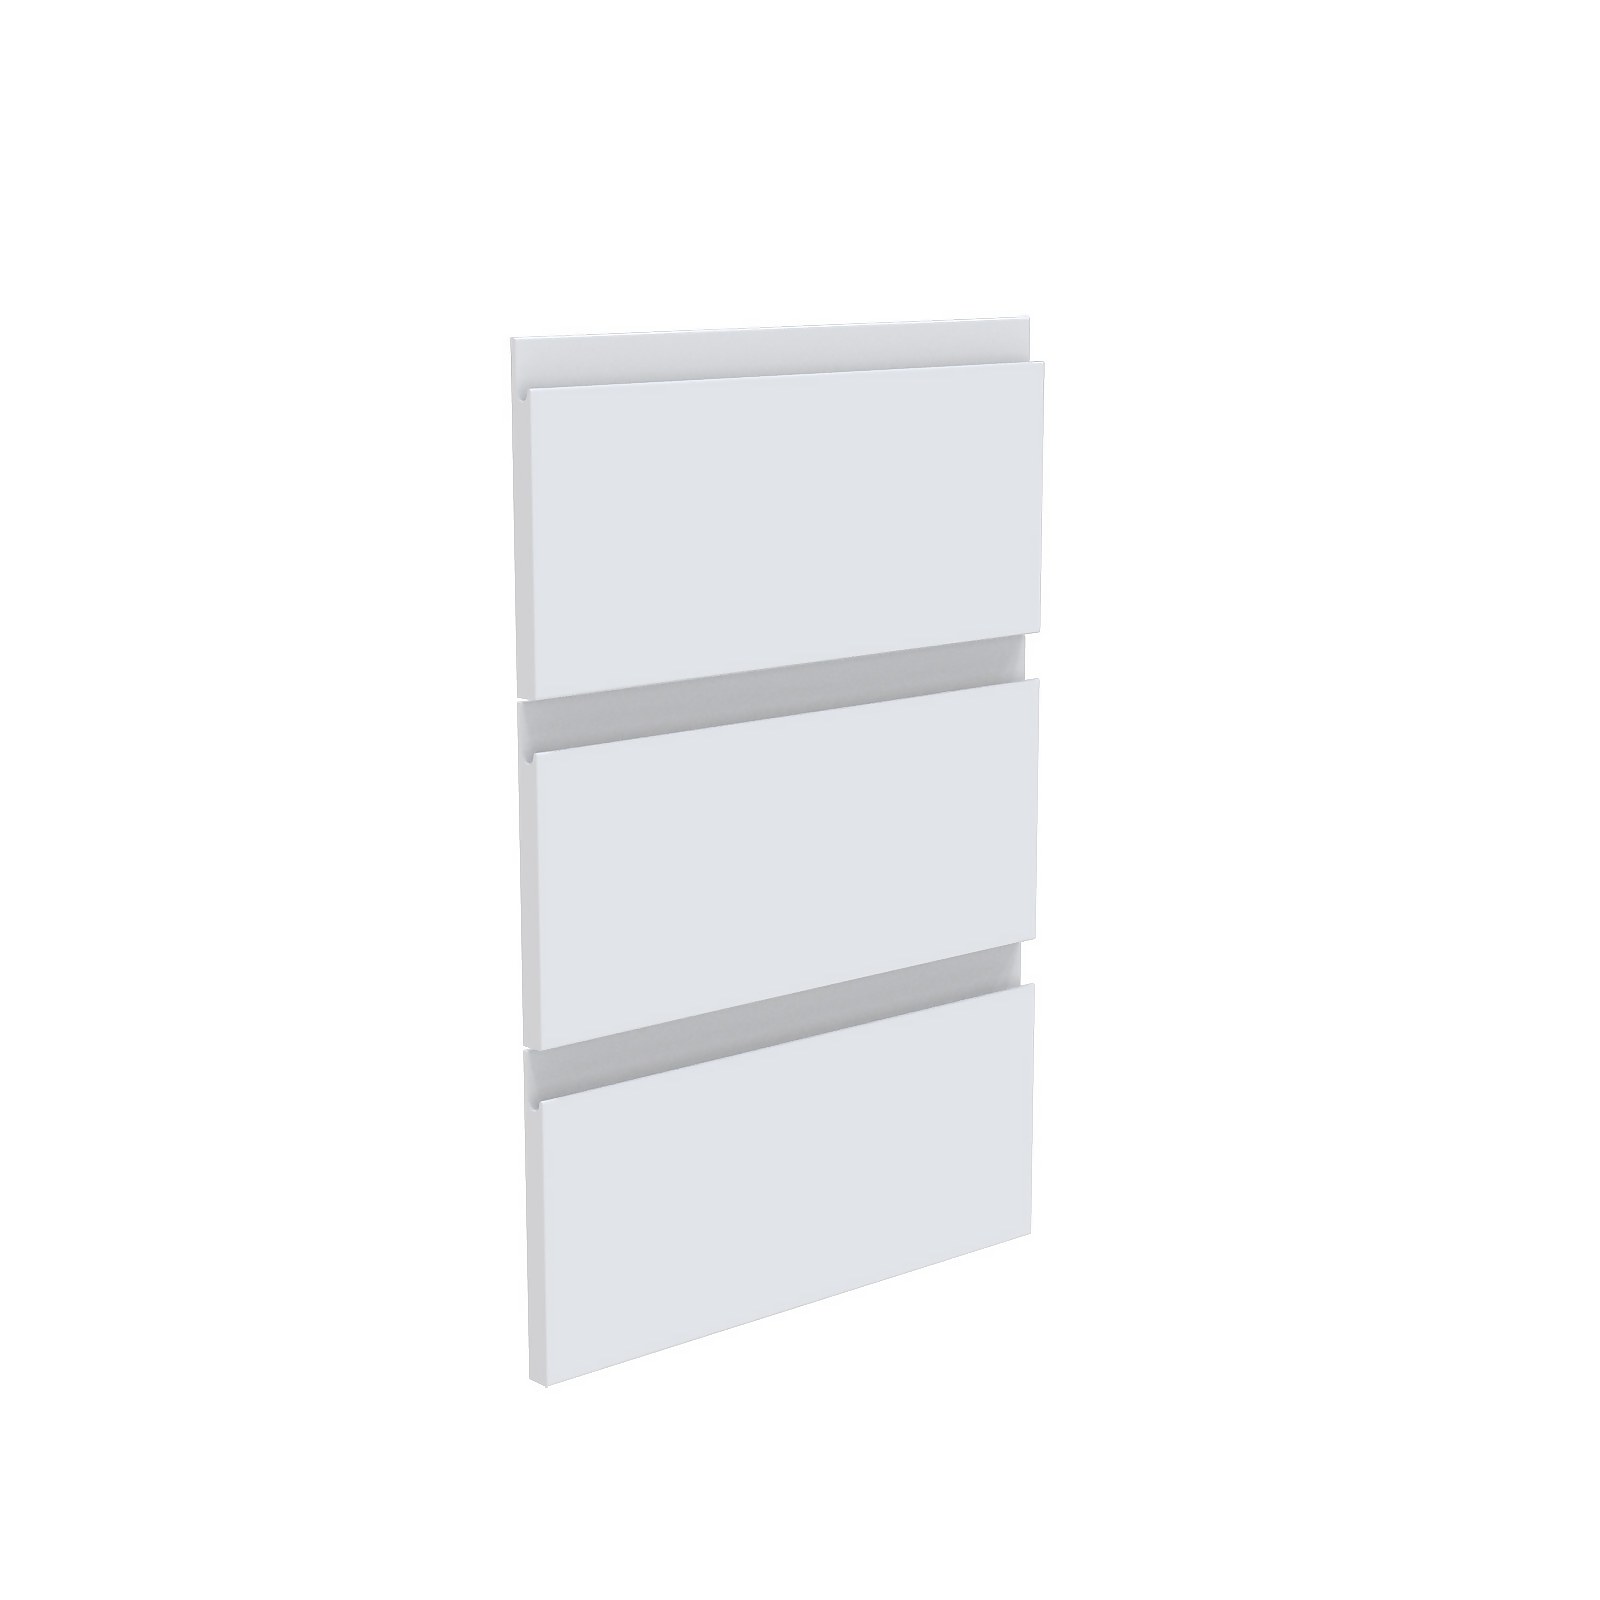 House Beautiful Escape Narrow Chest of Drawers Fronts - Gloss White Handleless